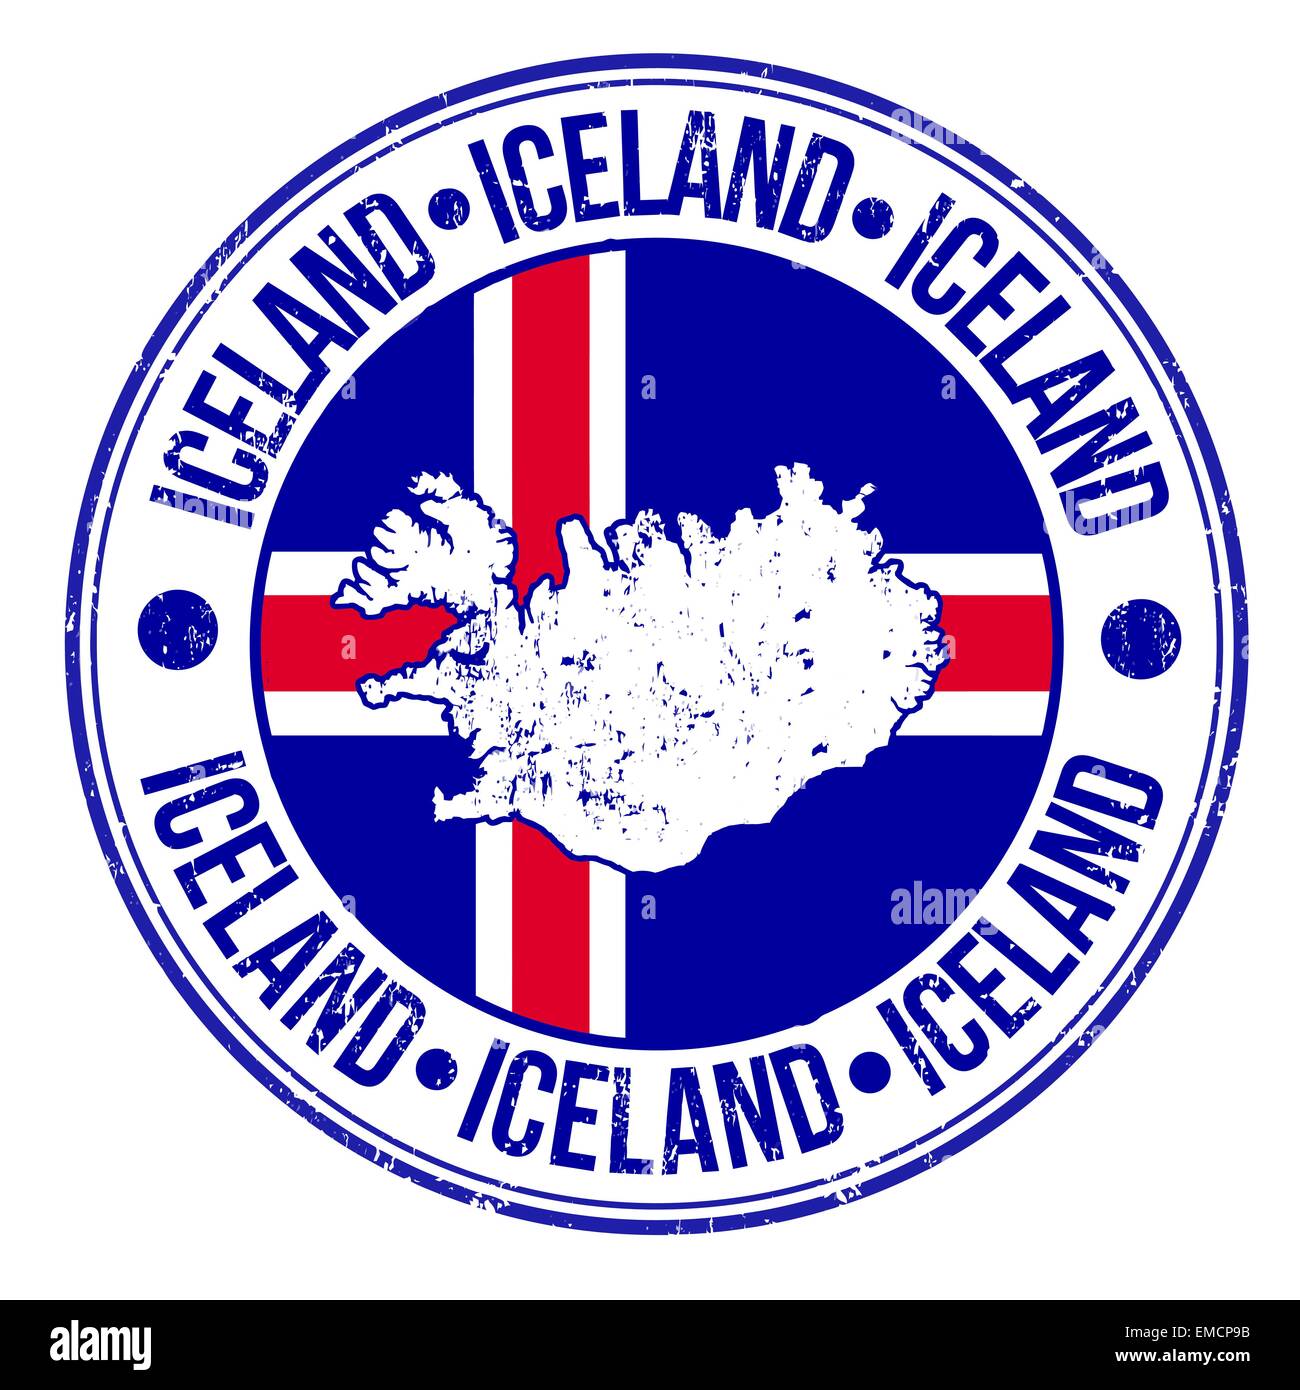 Iceland stamp Stock Vector